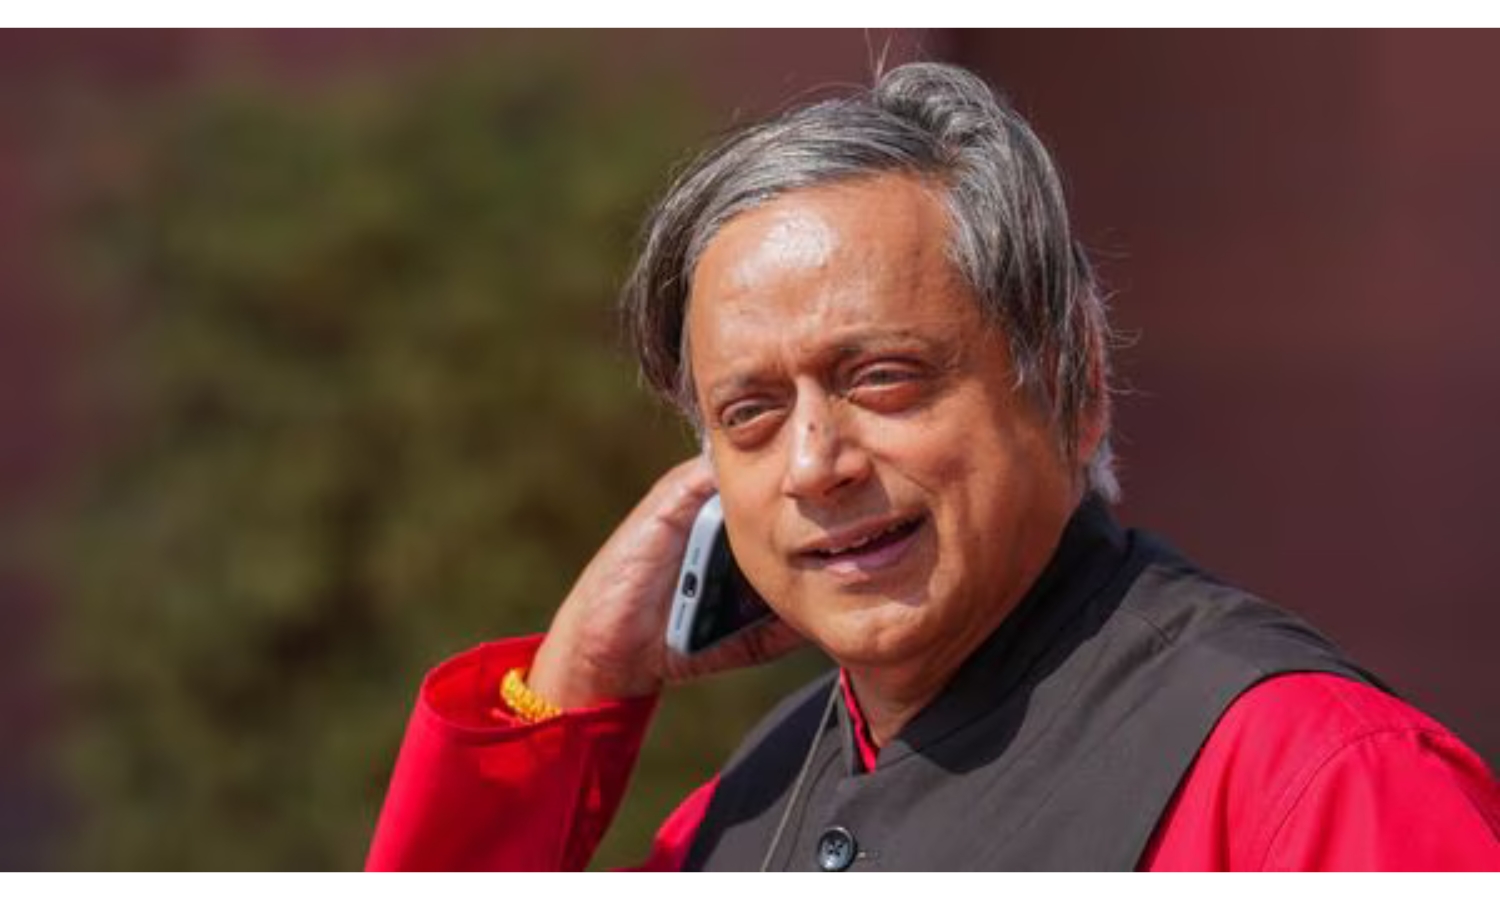 Congress MP Shashi Tharoor's Diverse Investment Portfolio Revealed: Over 217 Crore Invested Abroad, Including Bitcoin ETF